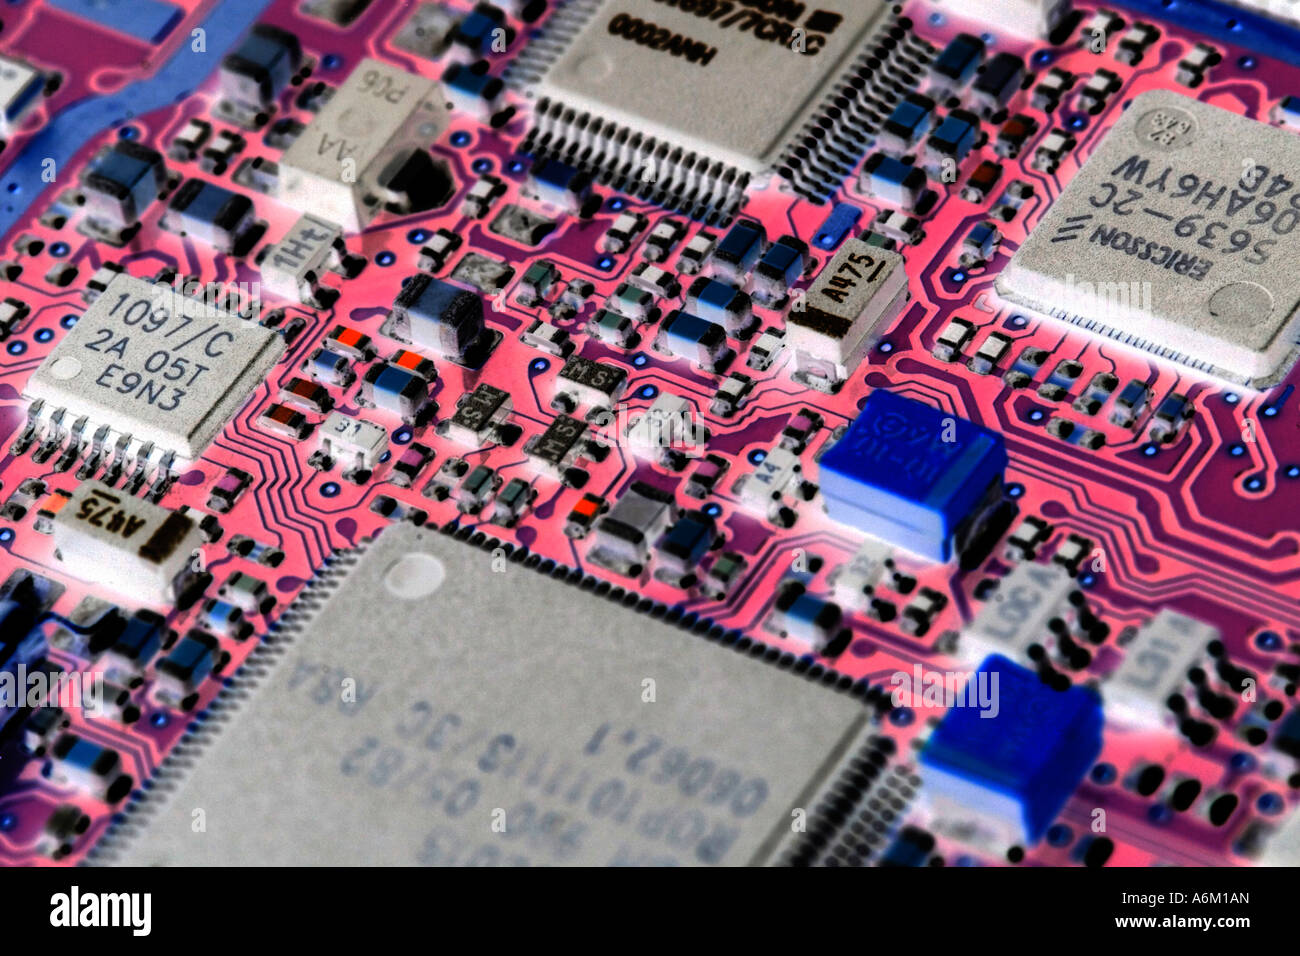 printed circuit board showing surface mount components Stock Photo